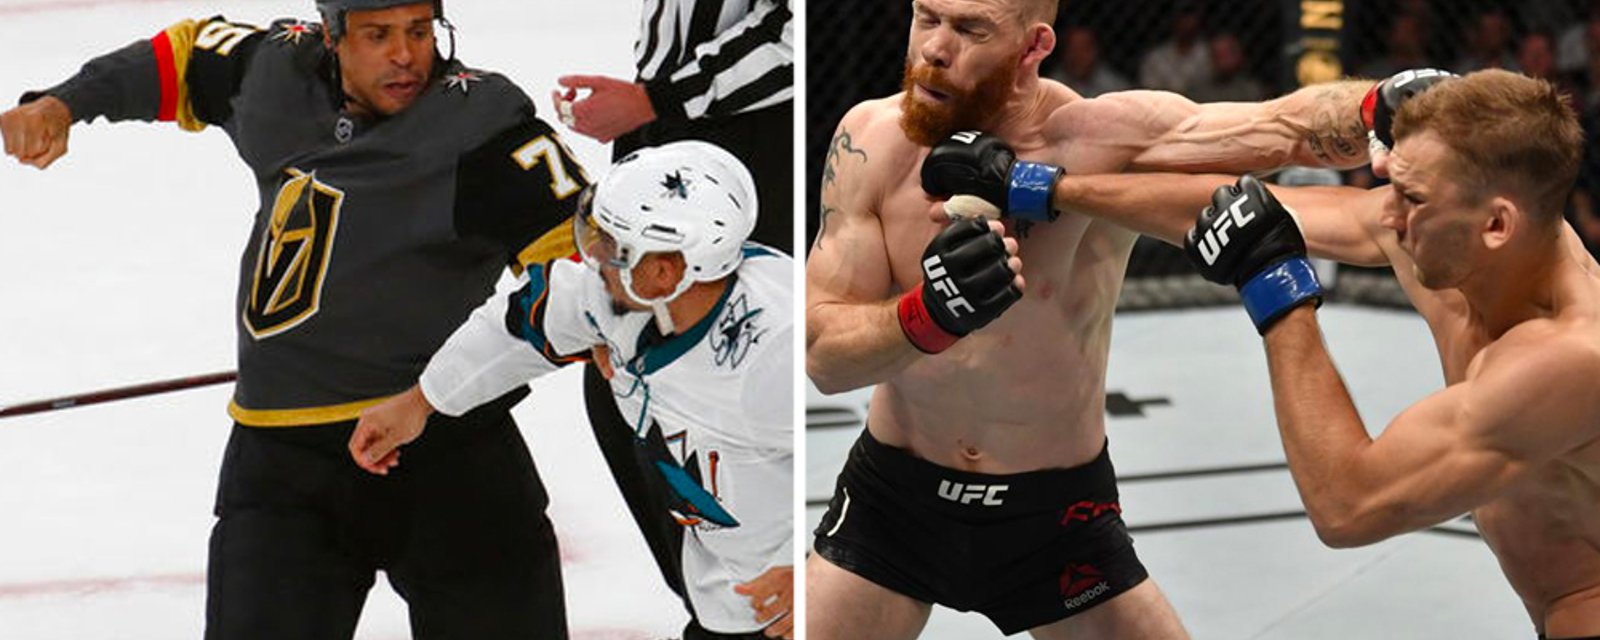 Report: UFC is planning a hockey fight tournament